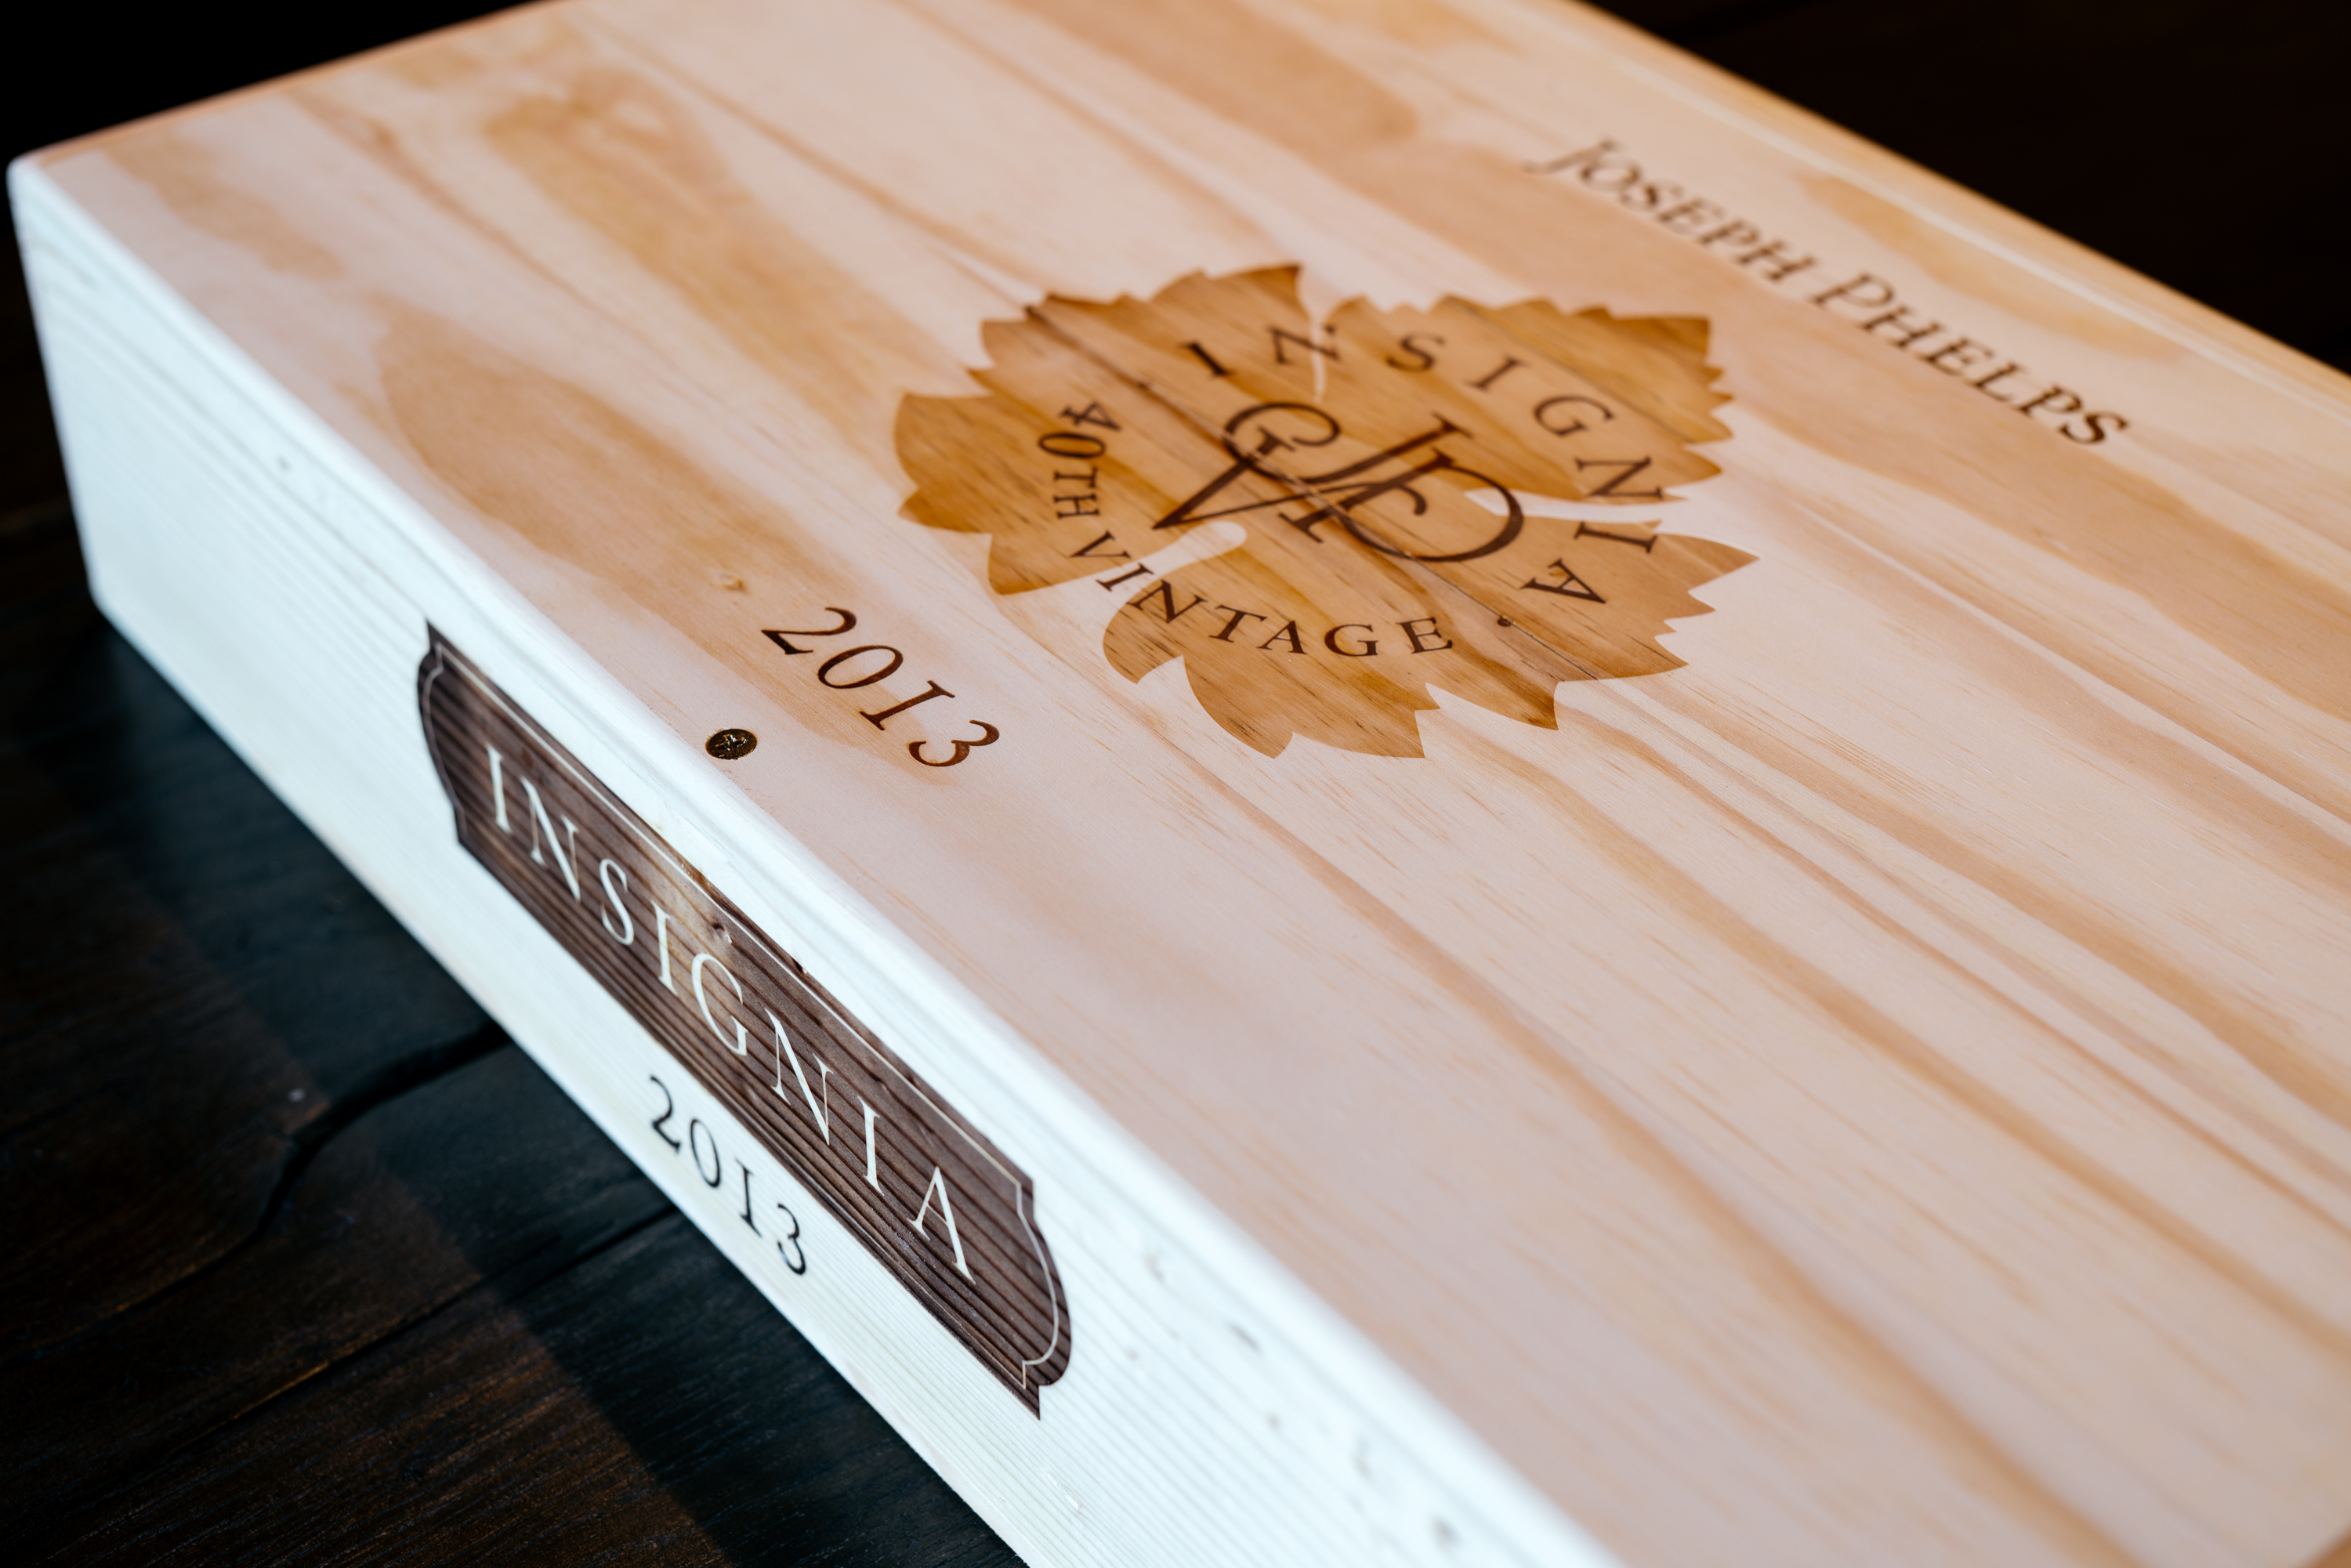 Phelps created a special 40th vintage logo that pays homage to the original 1970’s Insignia label design for inclusion on the 2013 Insignia label and a commemorative six-bottle wood box.